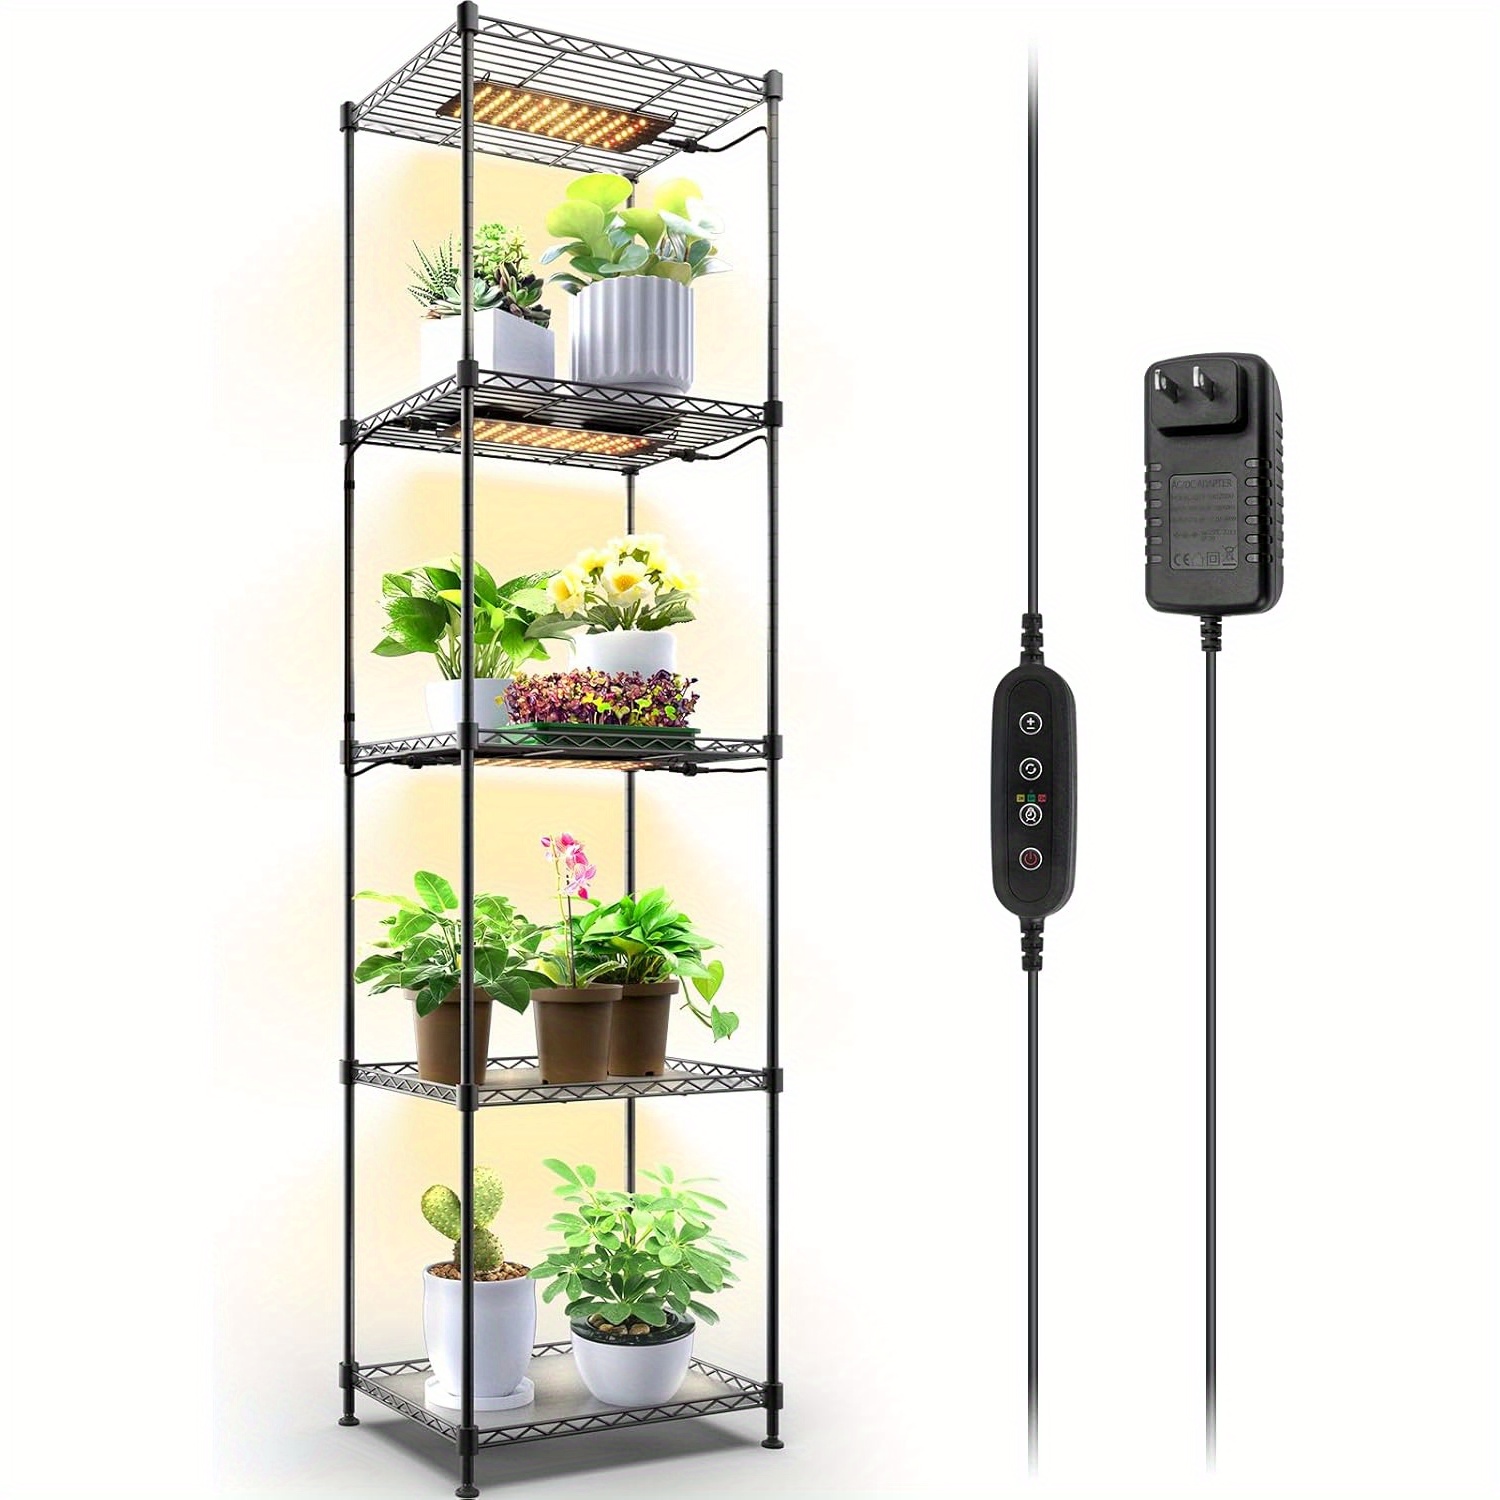 

Plant Shelf With Grow Light, 5-tier Plant Stand With 40w Ultra-thin Grow Light Panel For Hydroponics, Seedlings, Succulents, Veg, Flowers & More, Timer Switch, 15.7" L X 11.8" W X 59.1" H